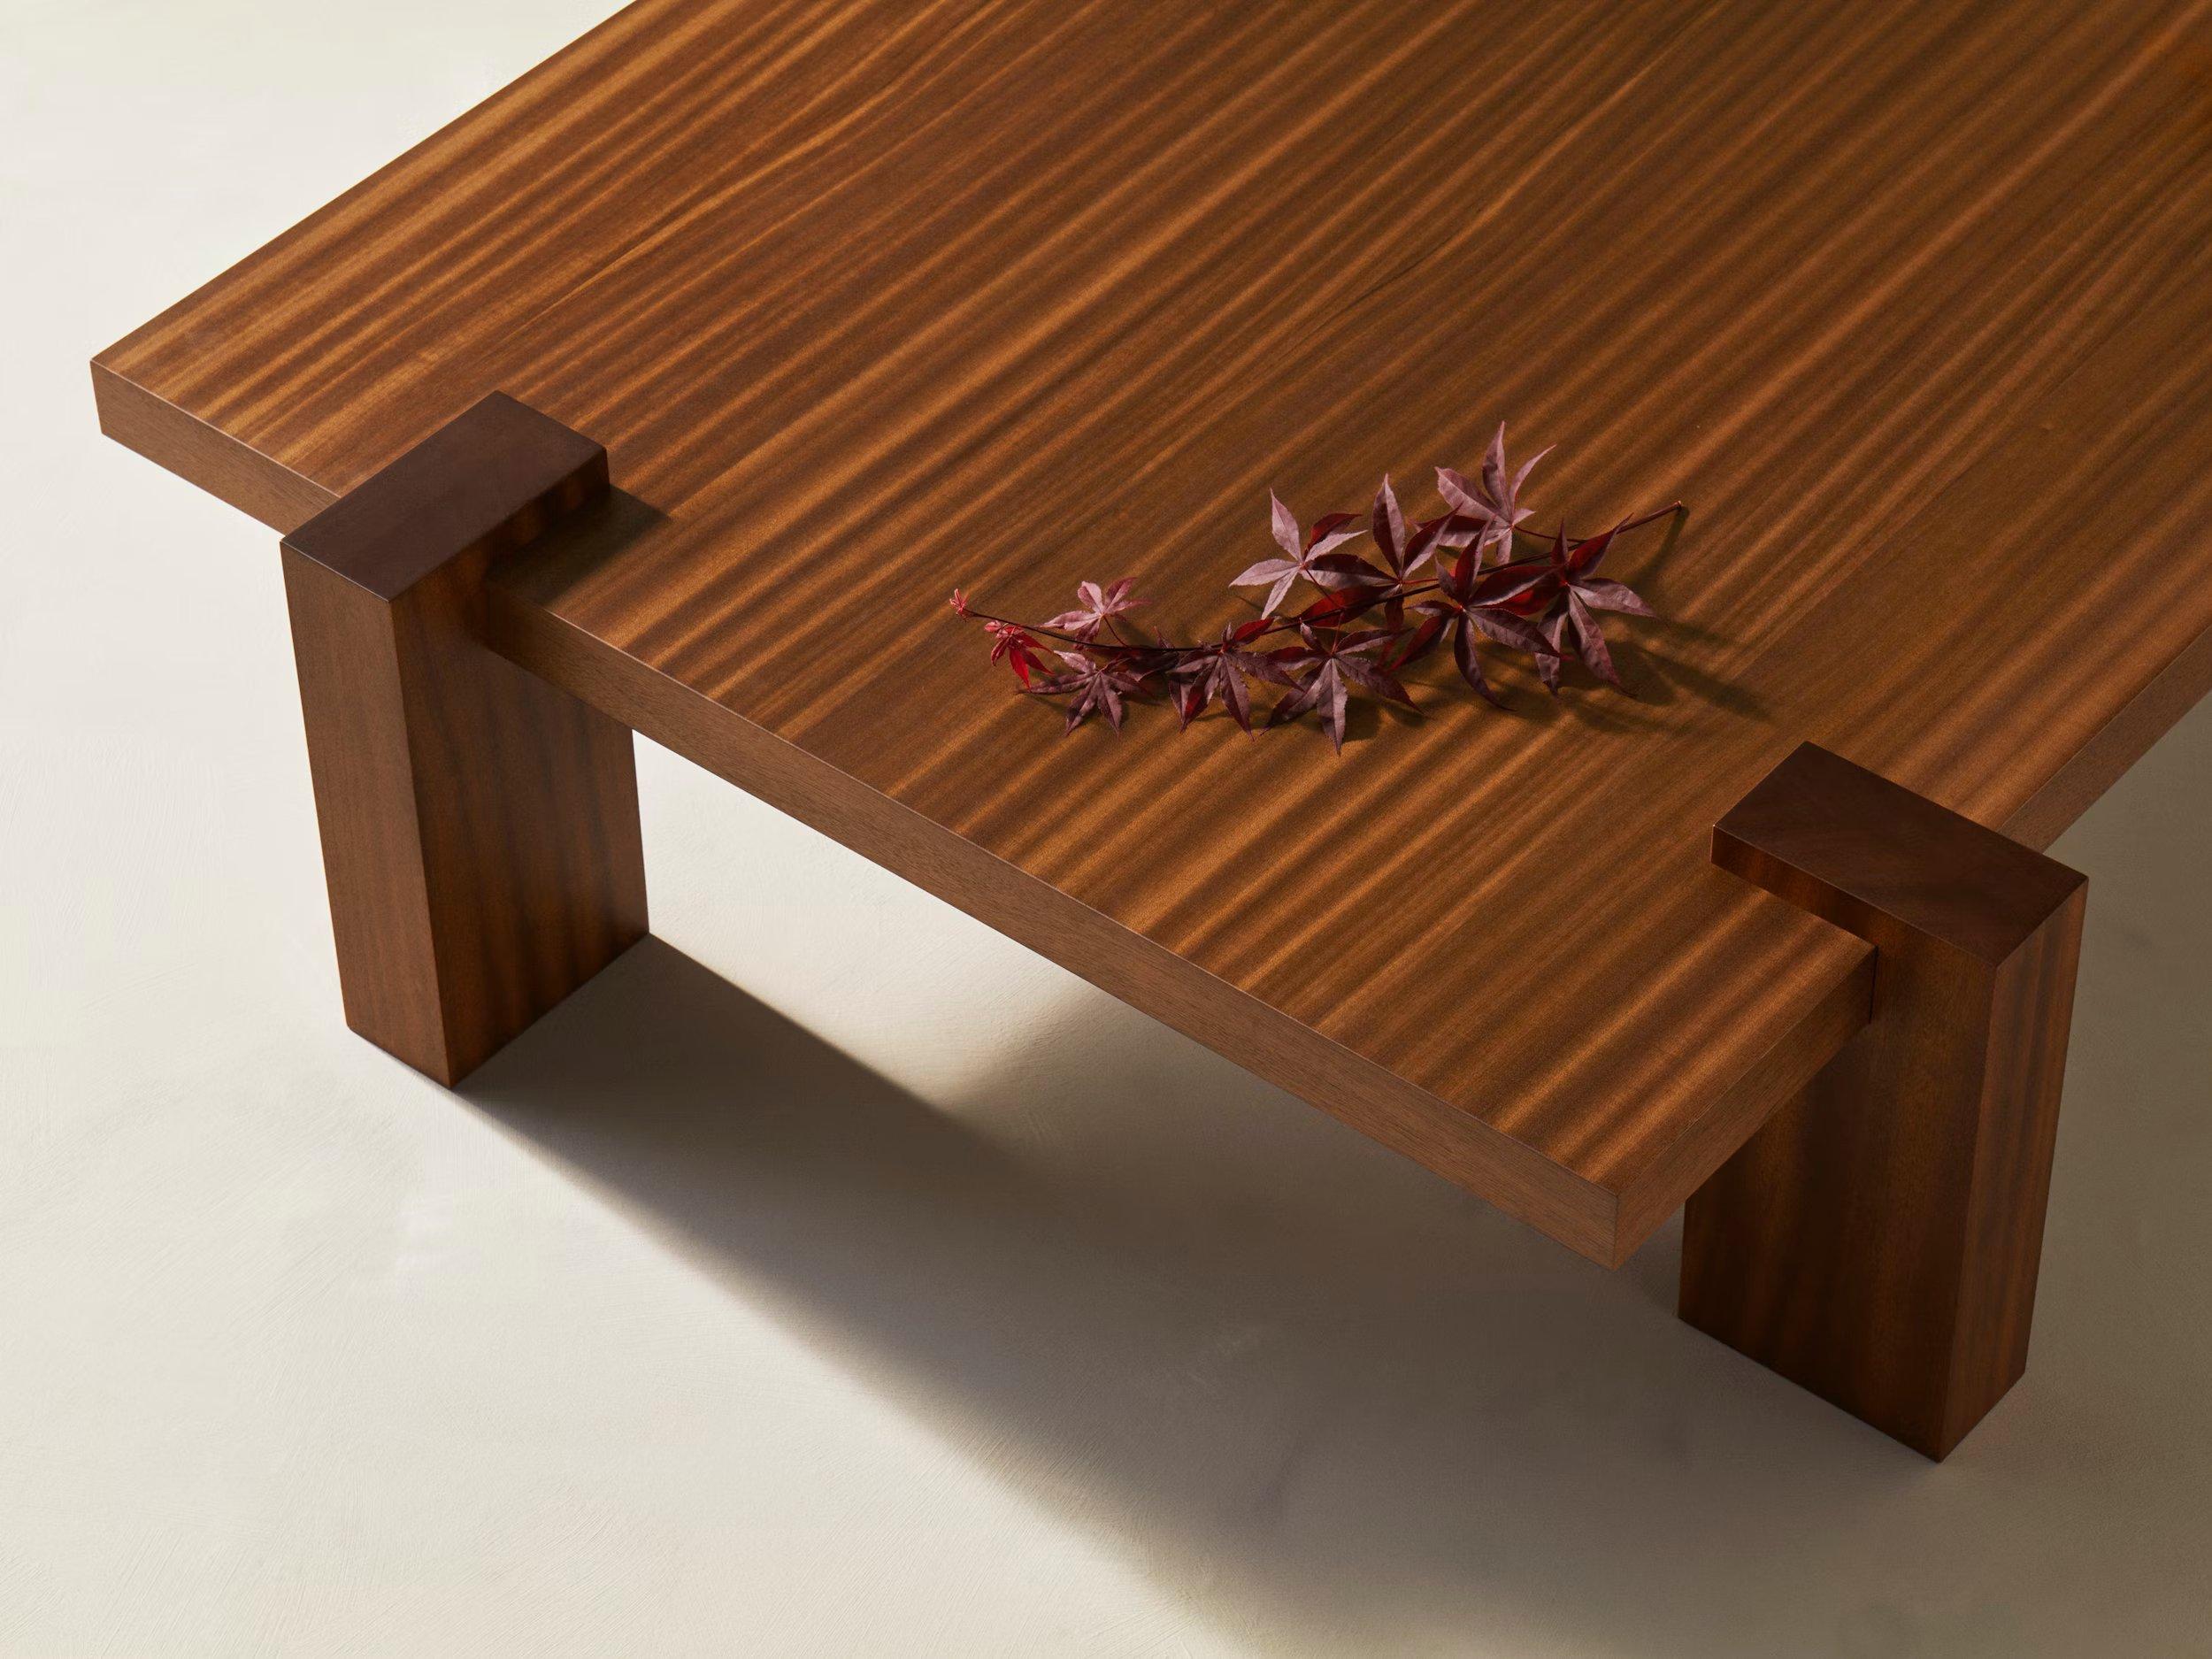 An inviting centerpiece to gather around, The Hug coffee table has a natural harmony with its legs seemingly engaged in friendly conversation. These understated yet thought-provoking details make this a wonderful design piece that combines